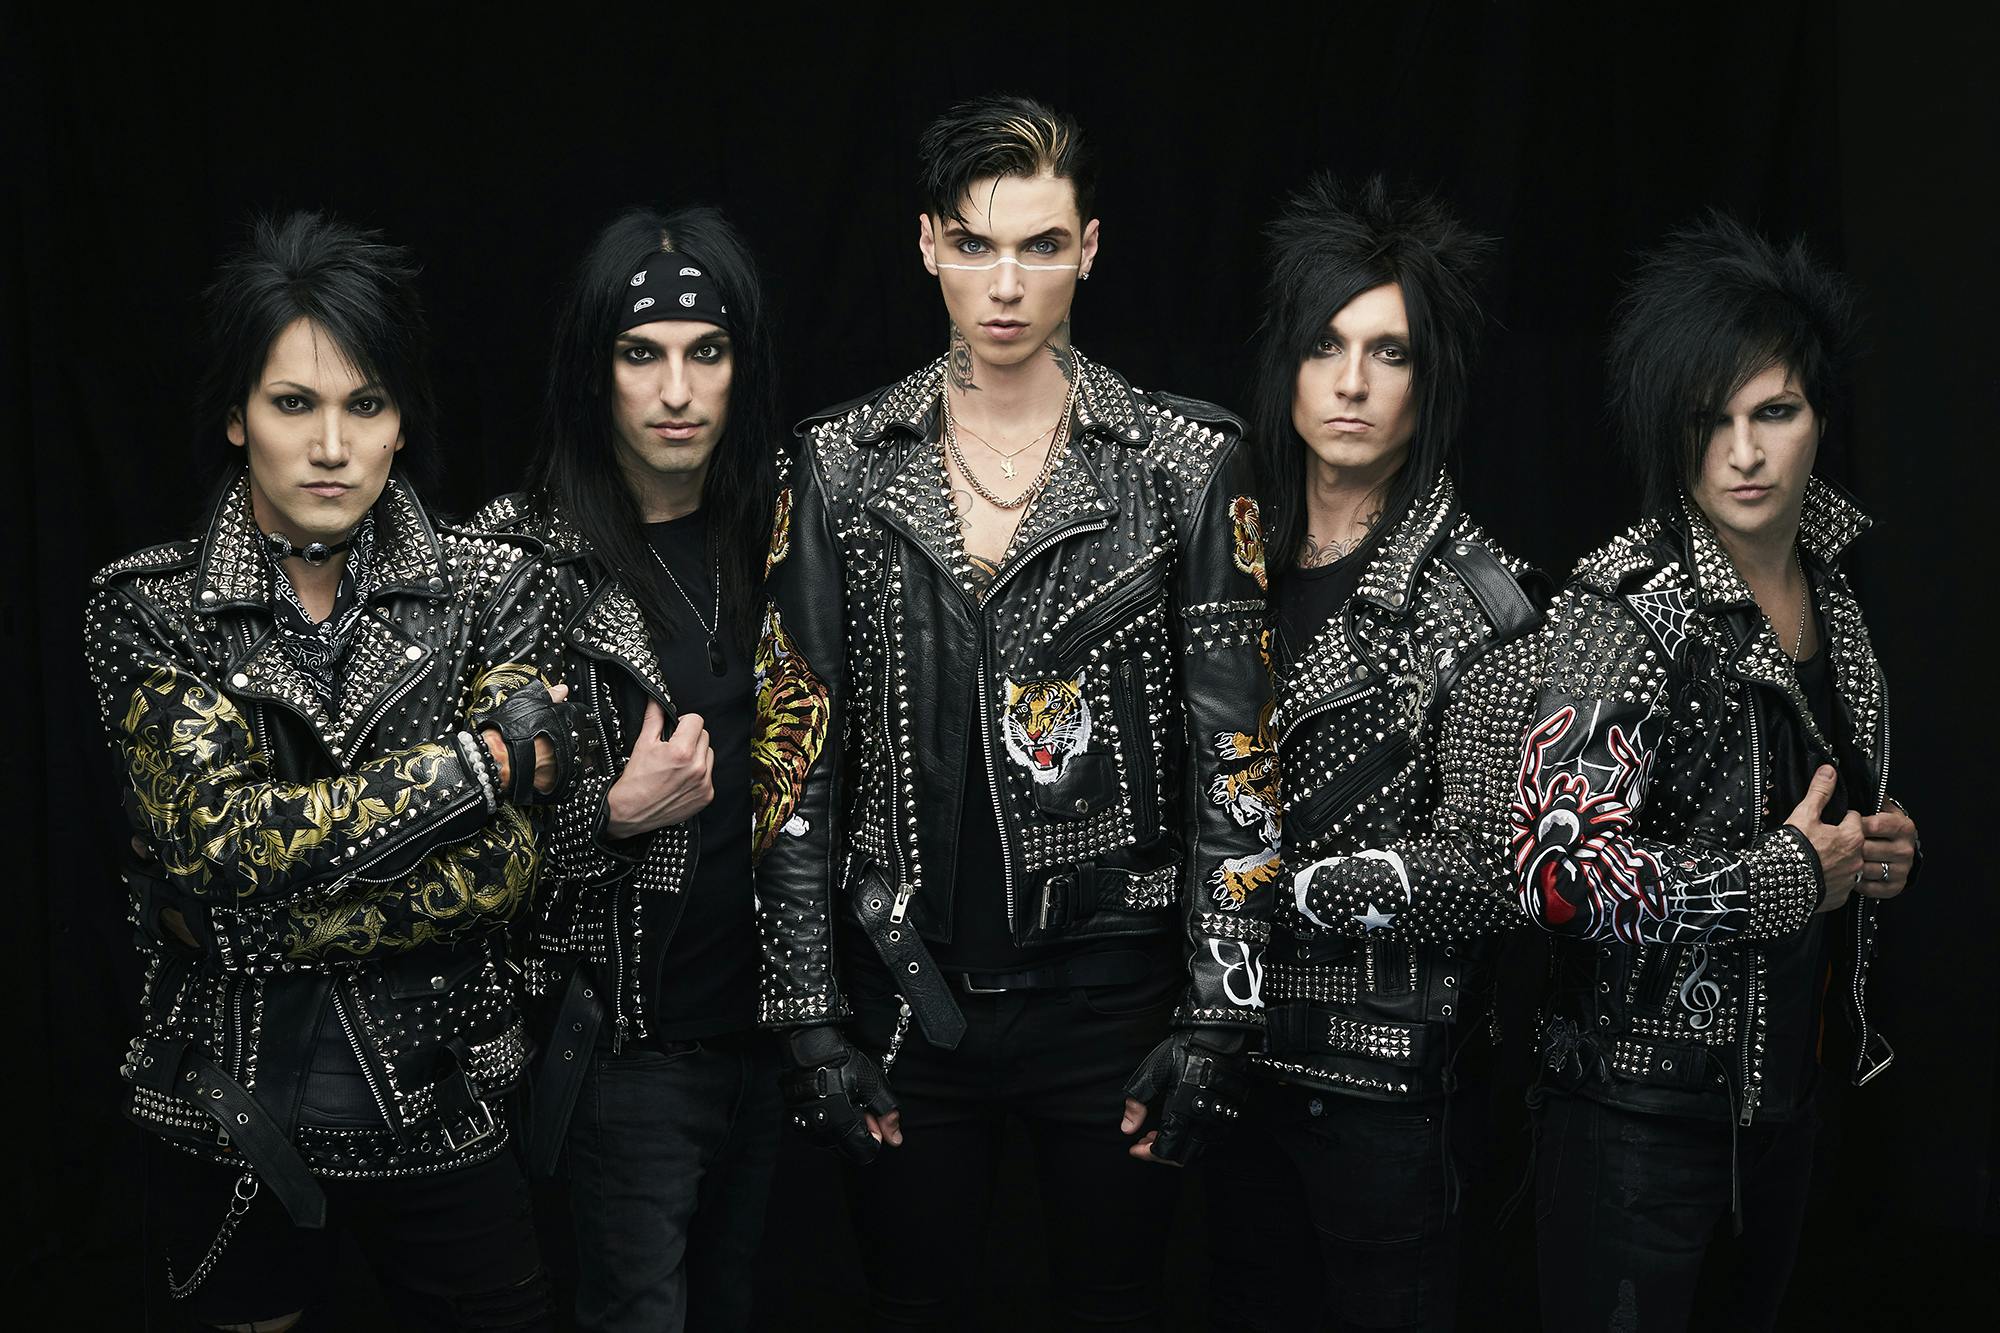 The New Black Veil Brides Song Is A Thing Of Beauty